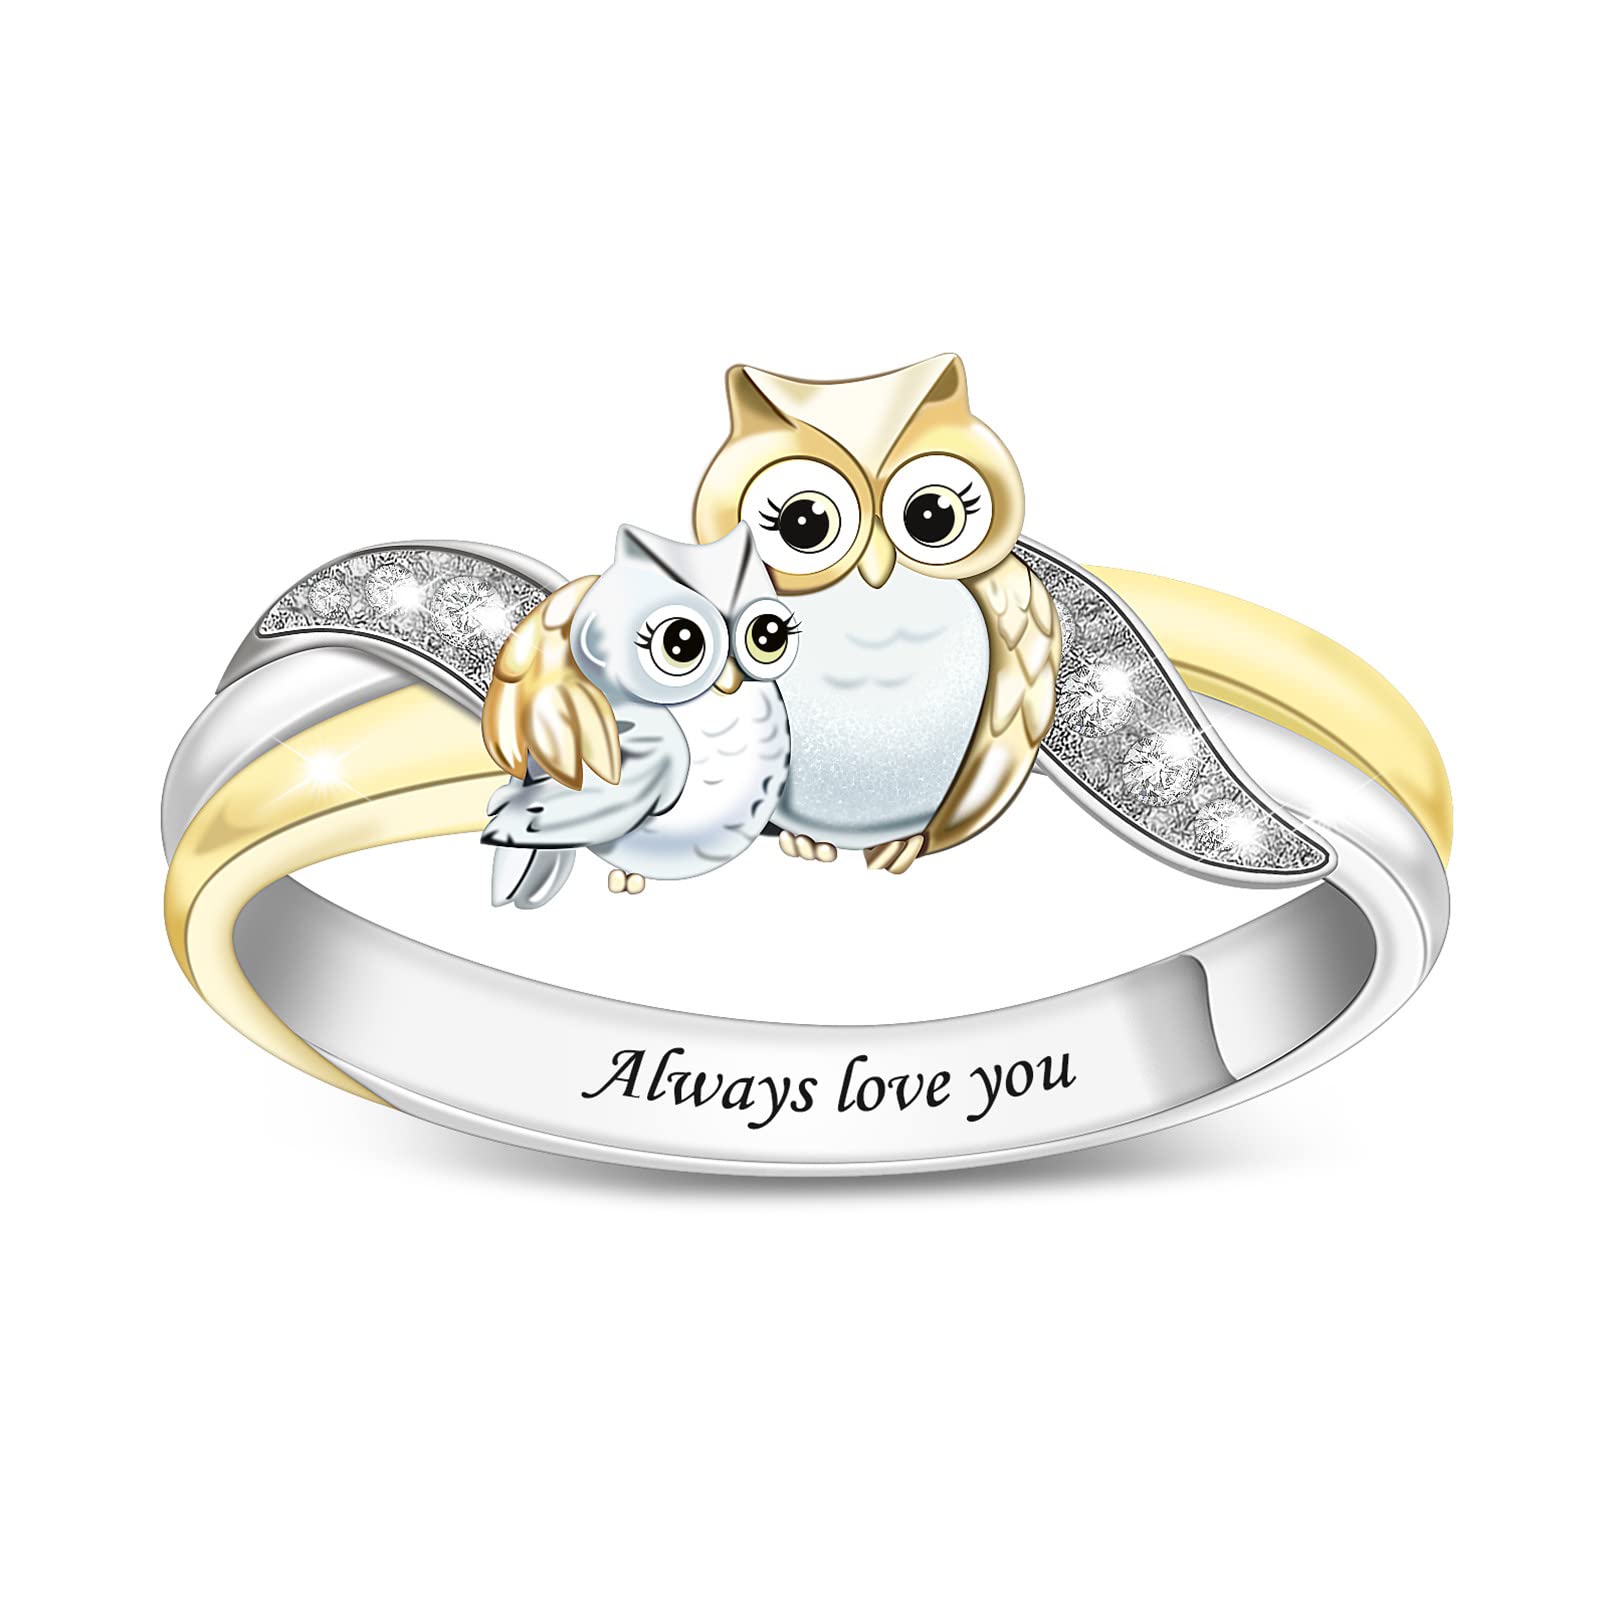 Personalized Owl Mother and Son Shaped Ring and Free Engraving.